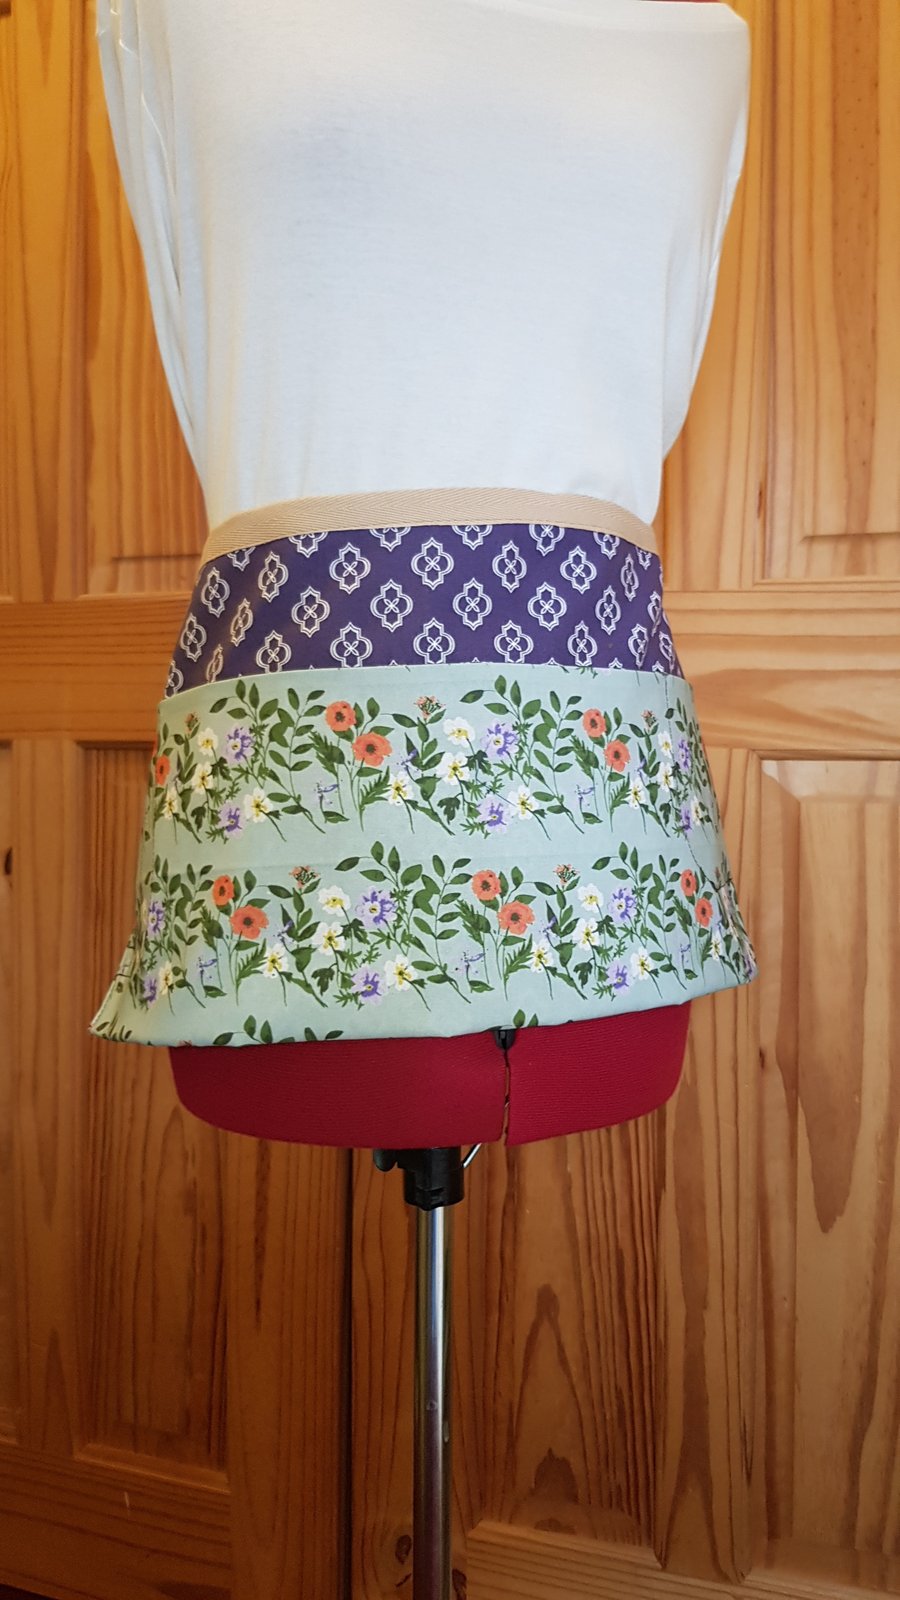 Garden apron with snips, labels, twine and pencil: poppies with purple 